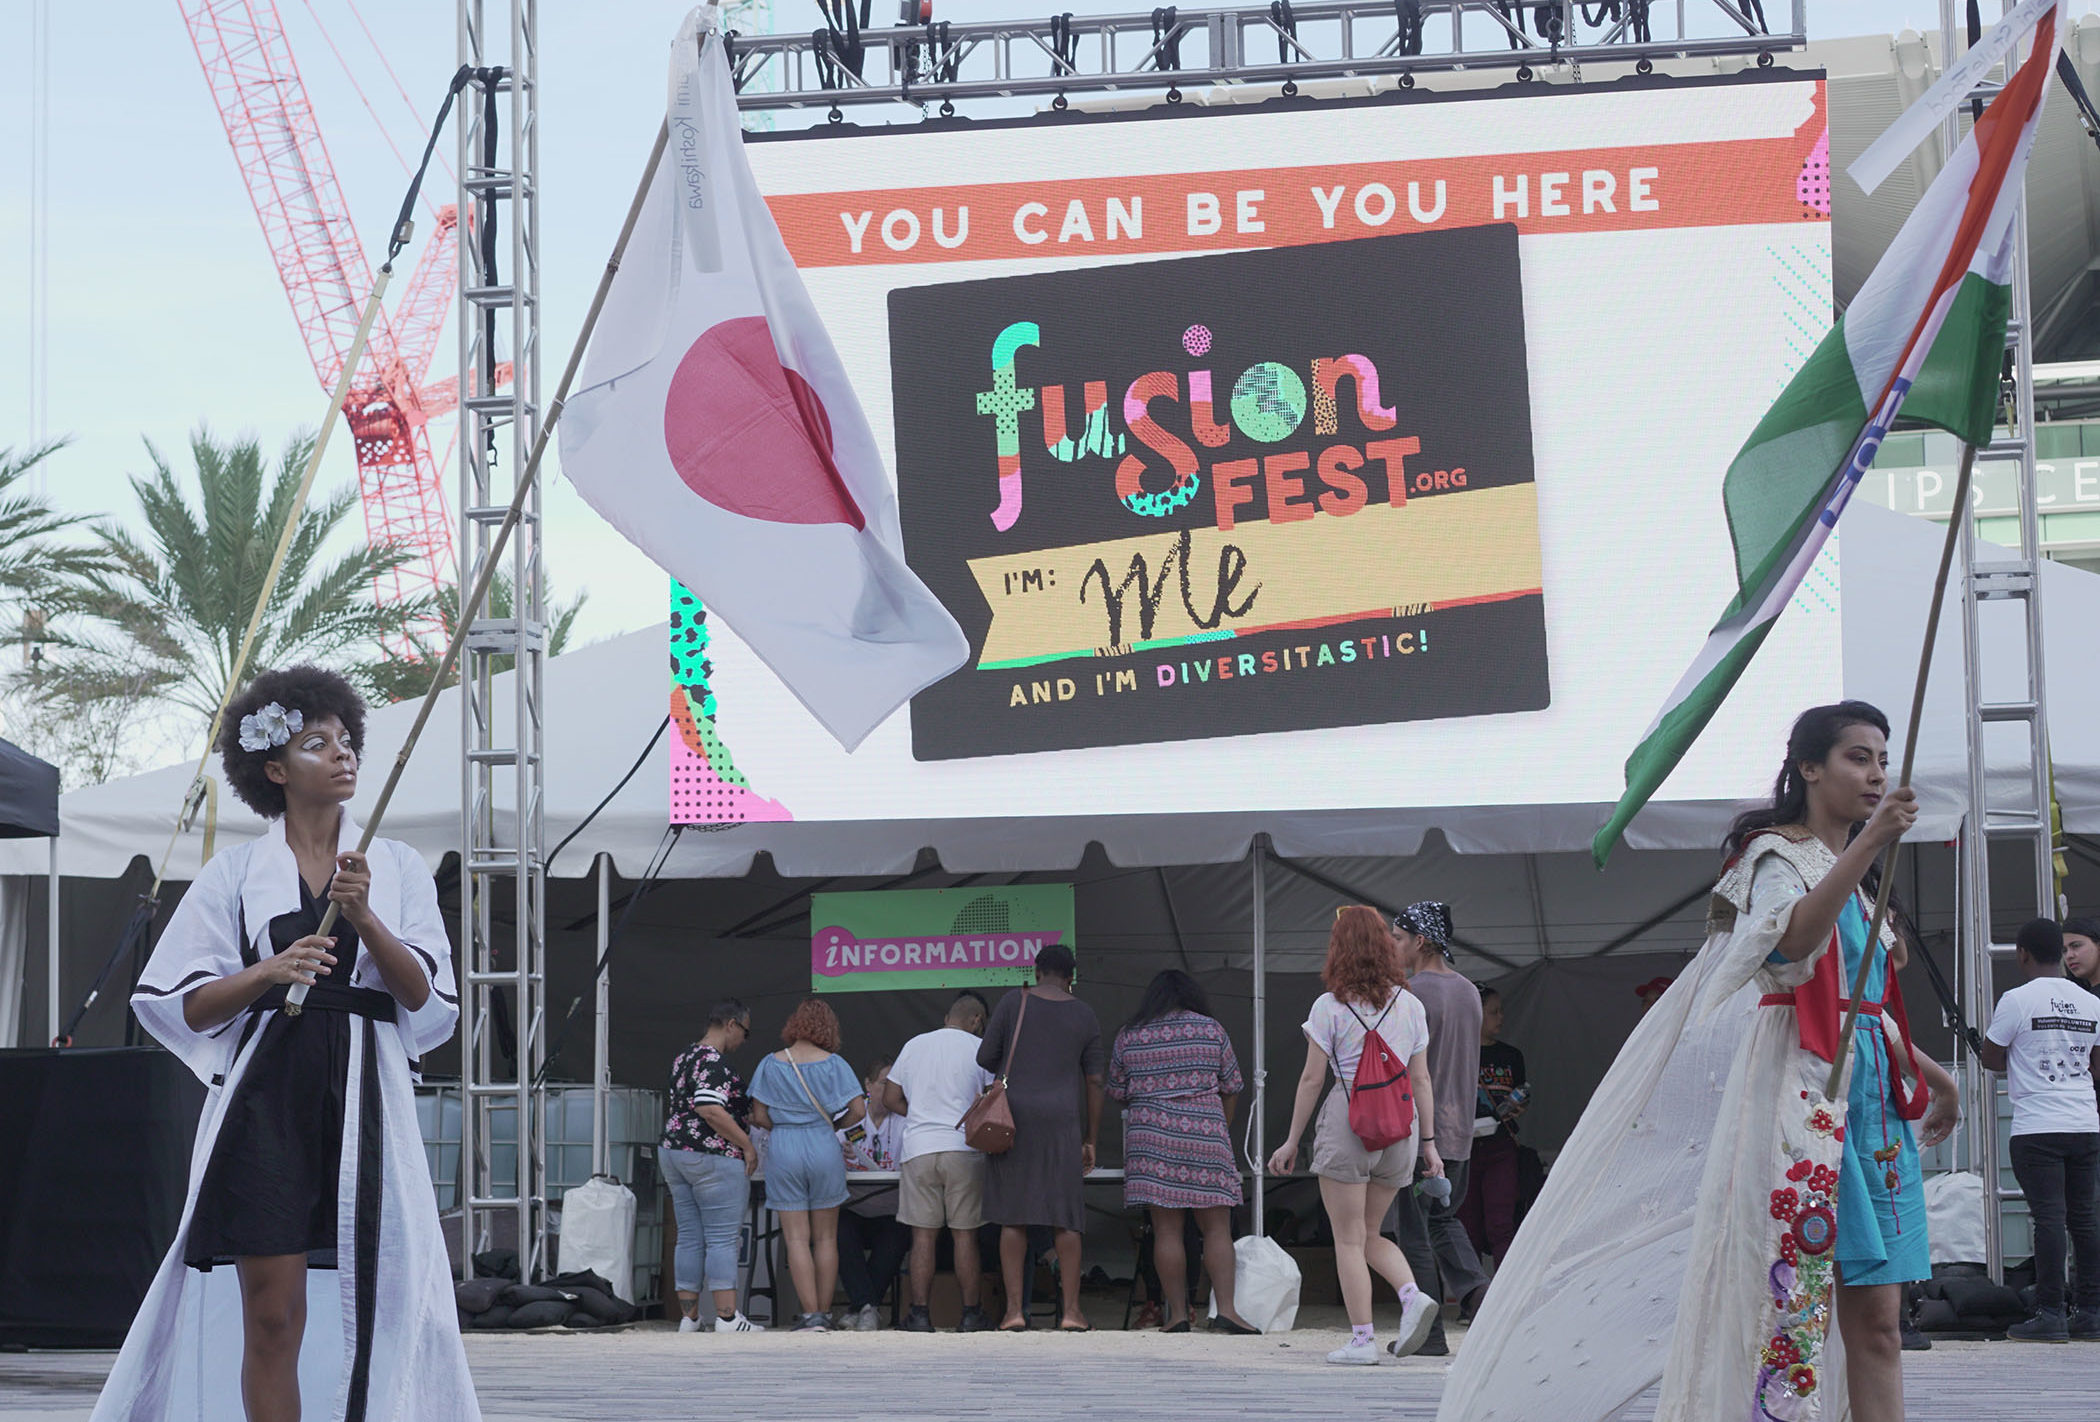 Two women carrying flags of different nations on a pole. Behind them is a large screen that reads "You can be You here. Fusion Fest."